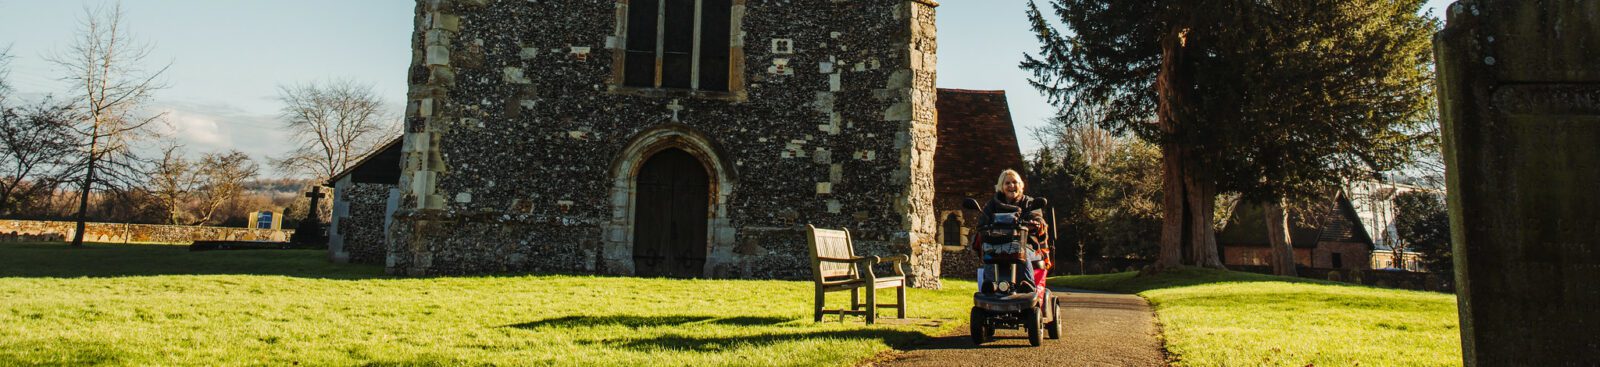 Person in a mobility scooter riding along path in front of Chilham church